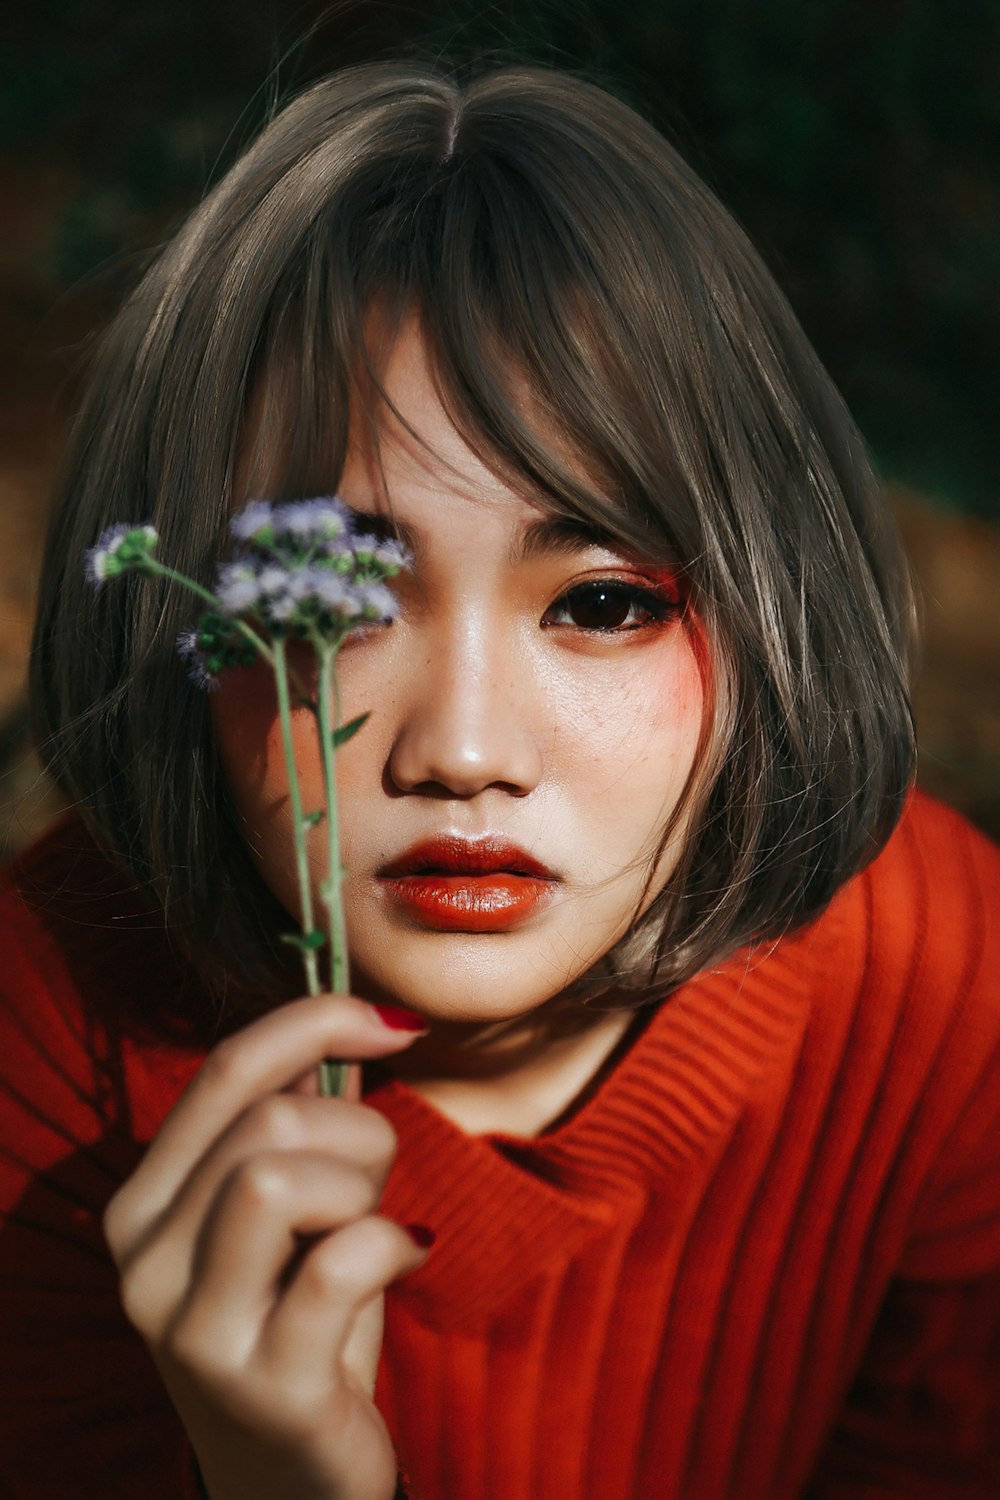 woman in red sweater holding white flower